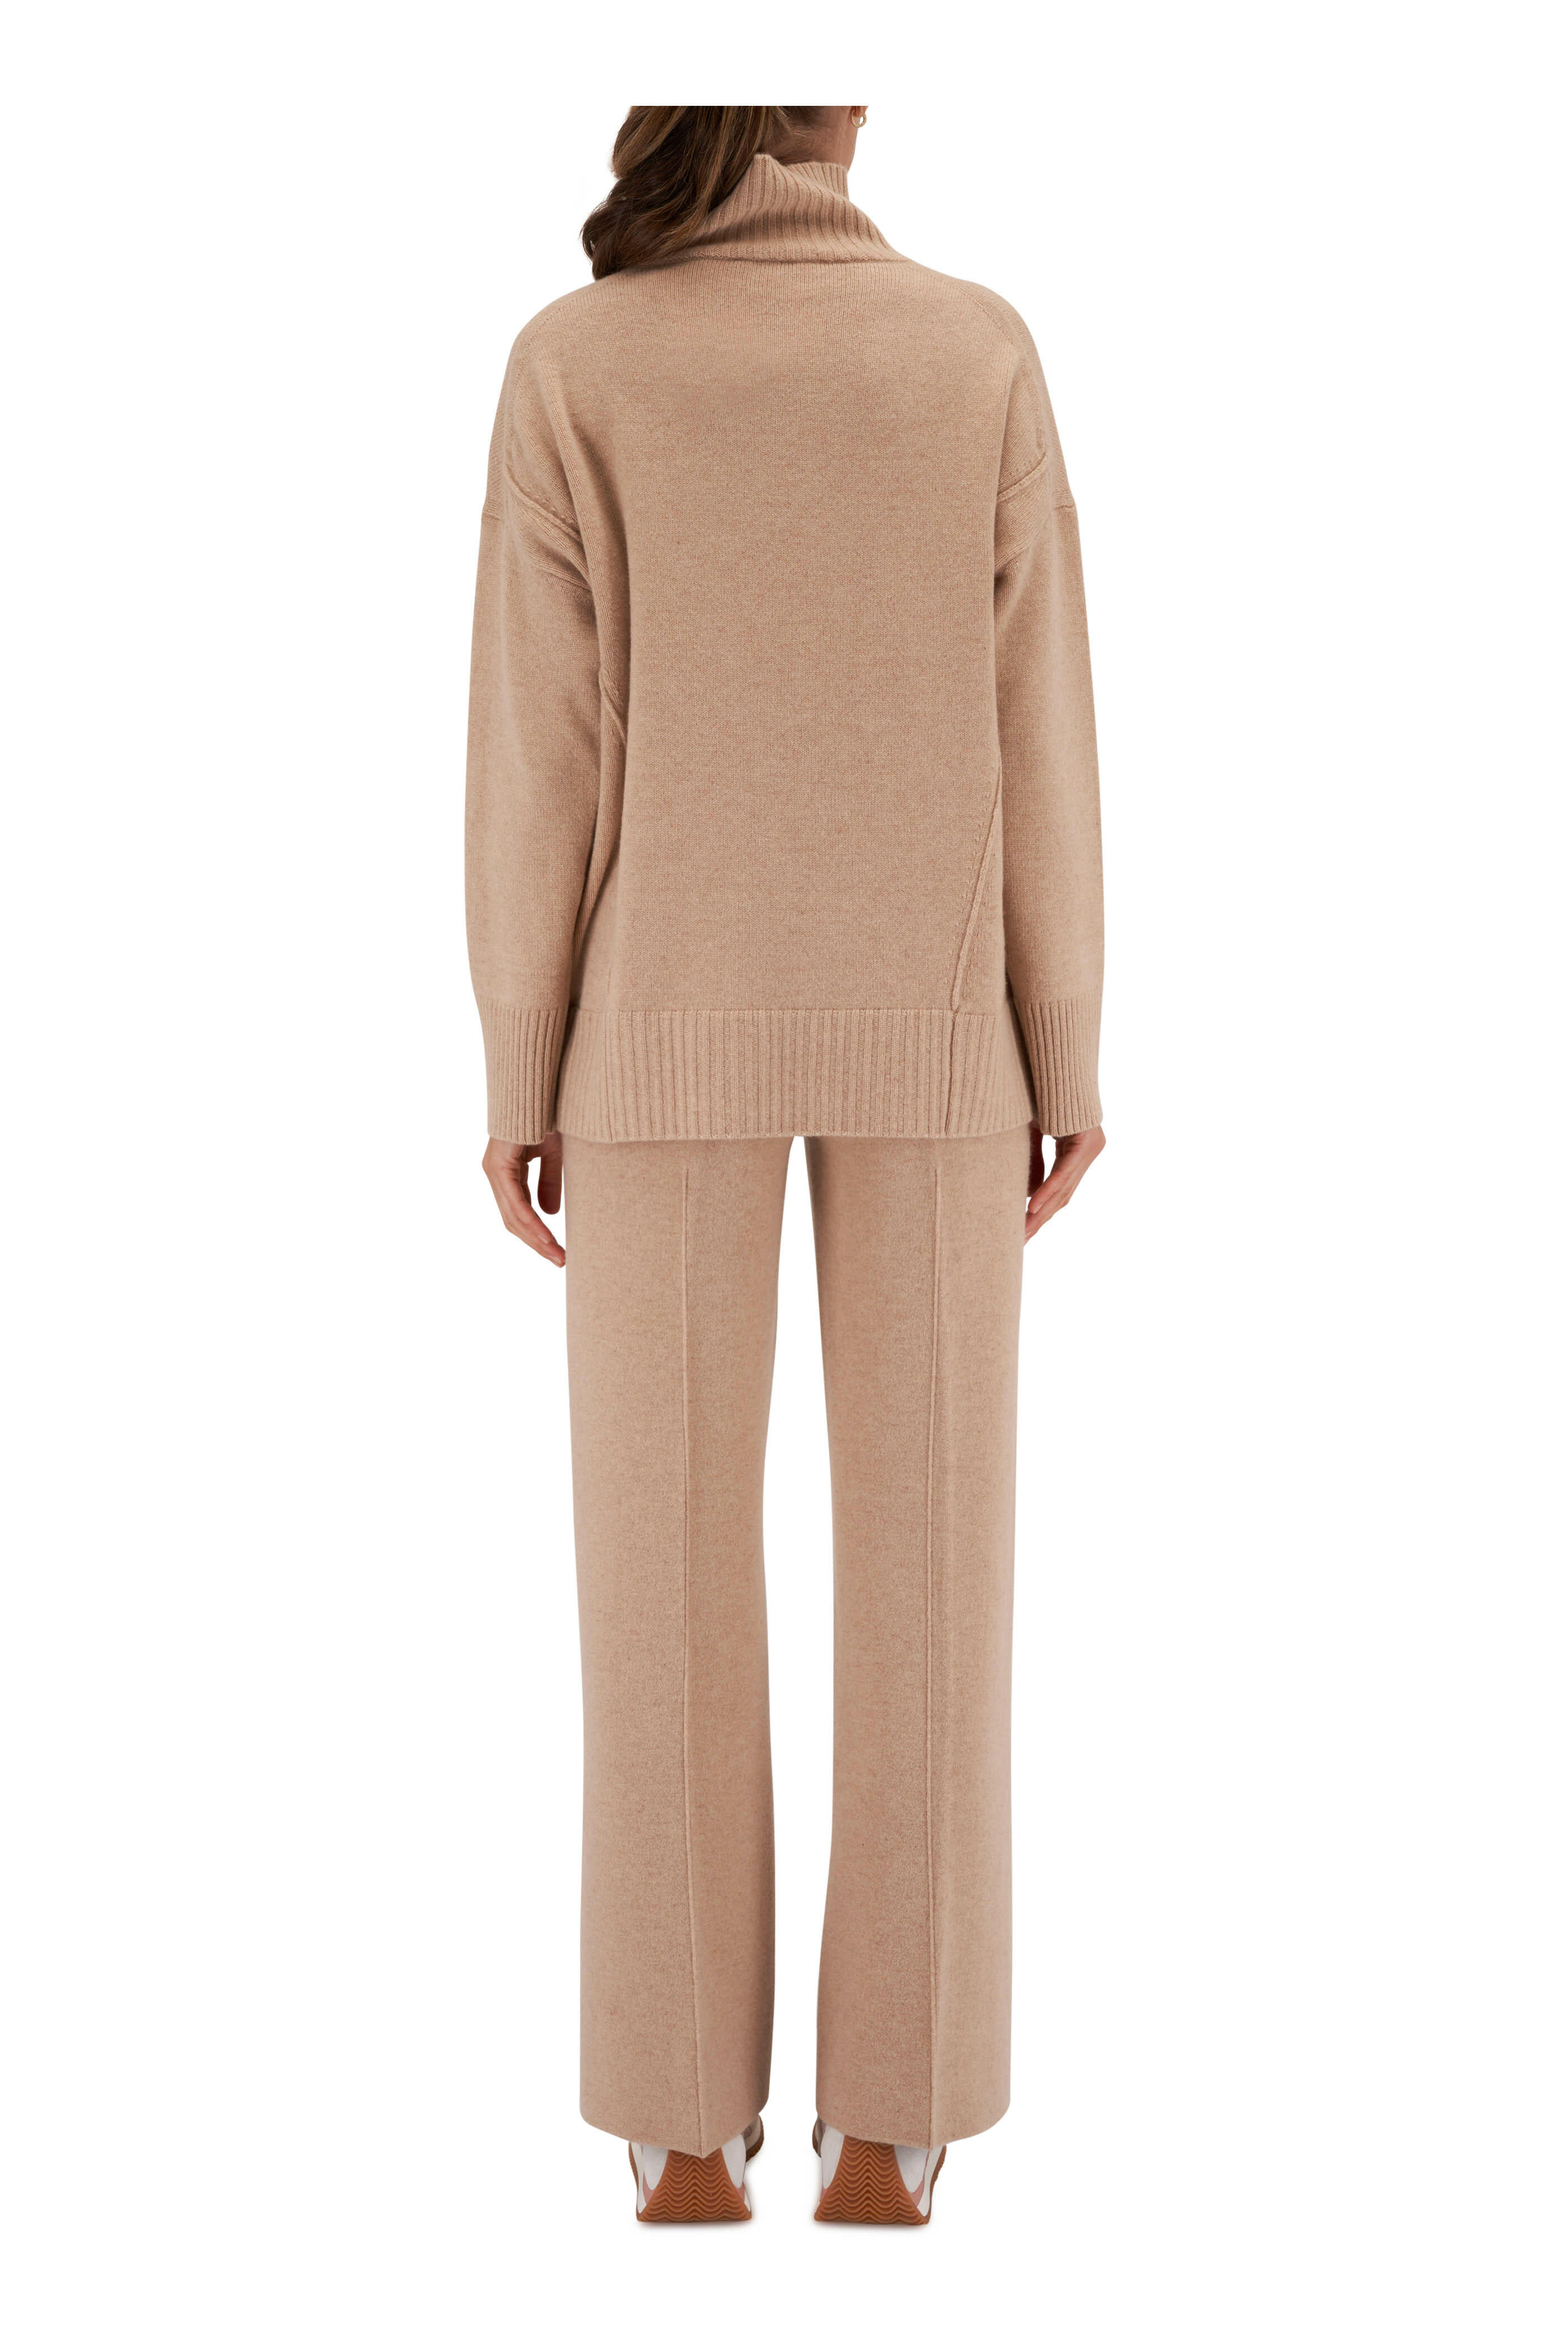 Lafayette 148 New York Manhattan Cropped Flare Pants in Natural